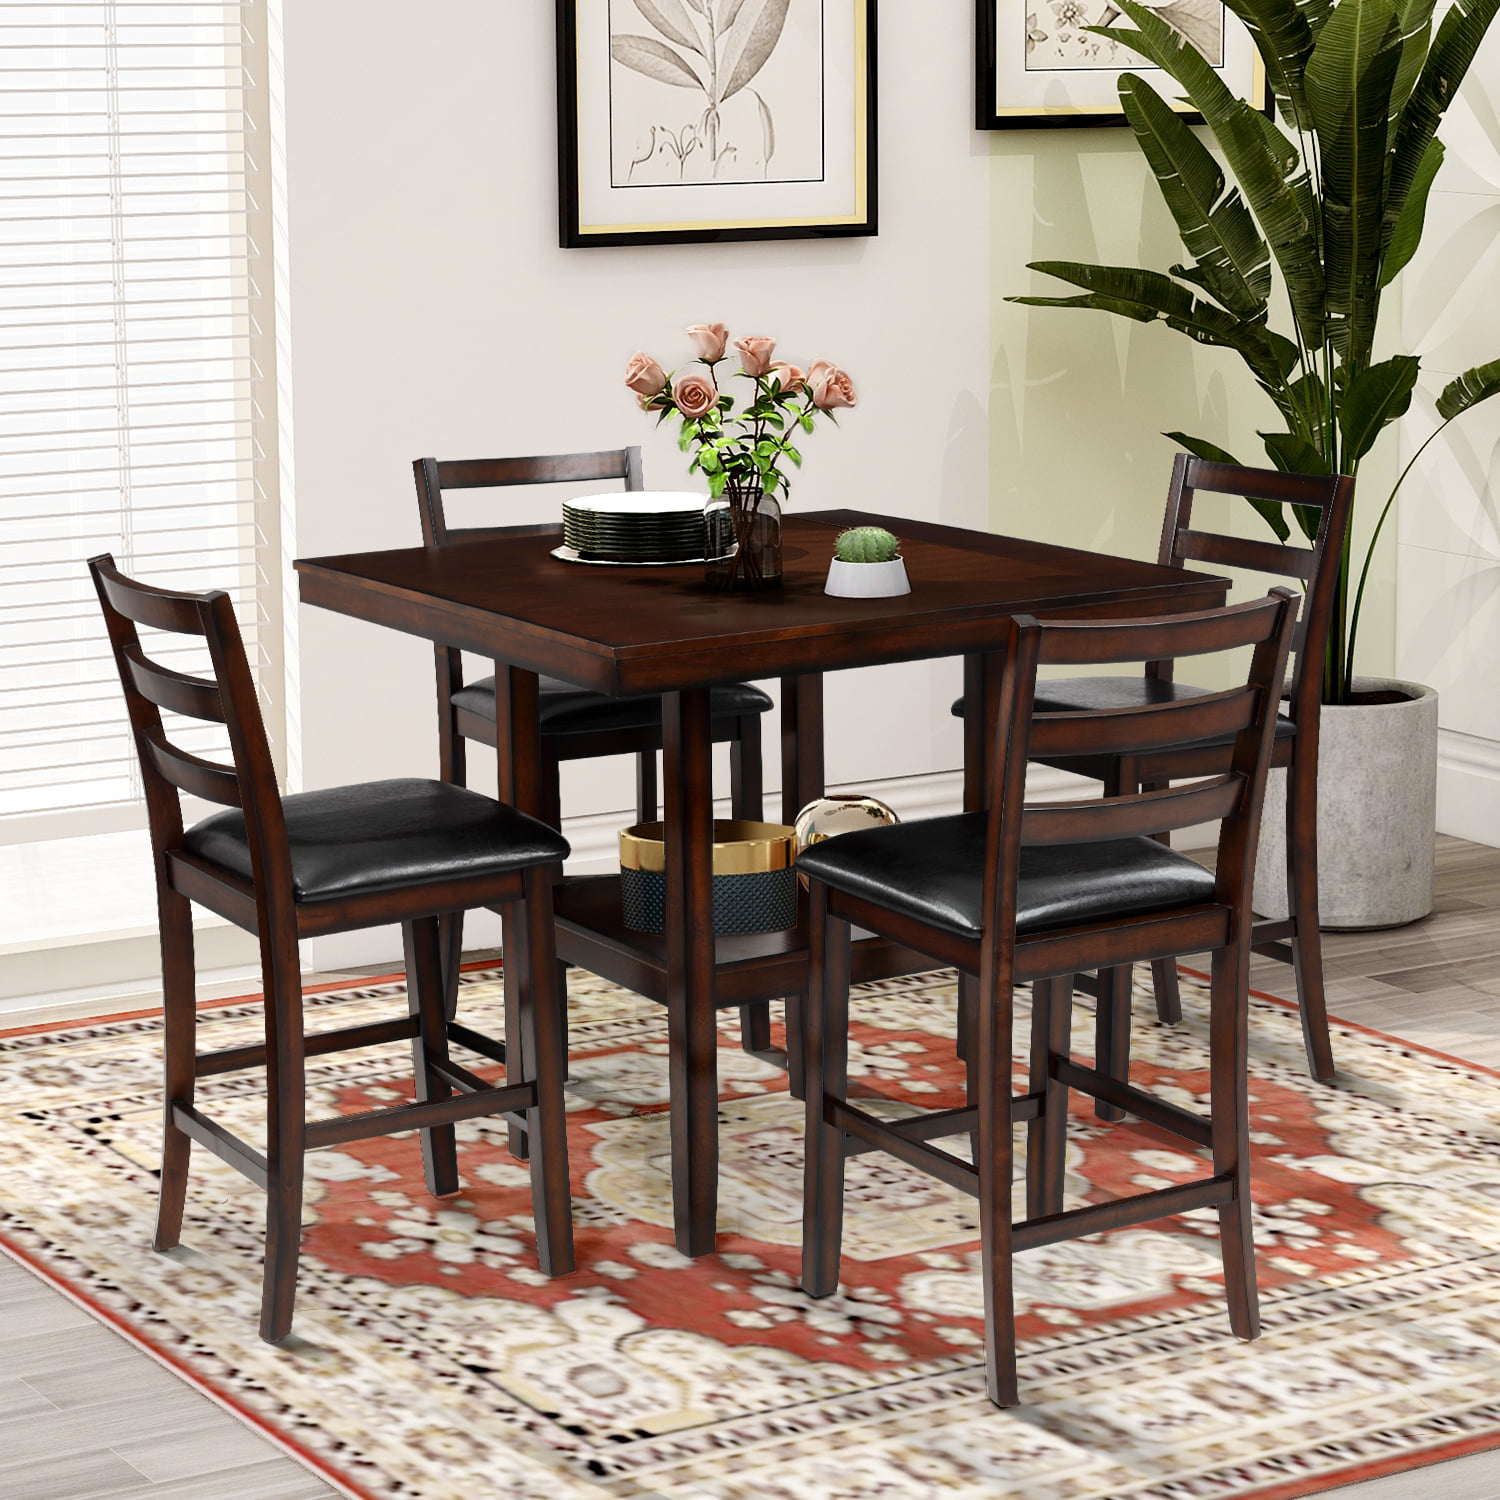 EUROCO 5-Piece Counter Height Dining Set, Wooden Dining Set with Padded ...